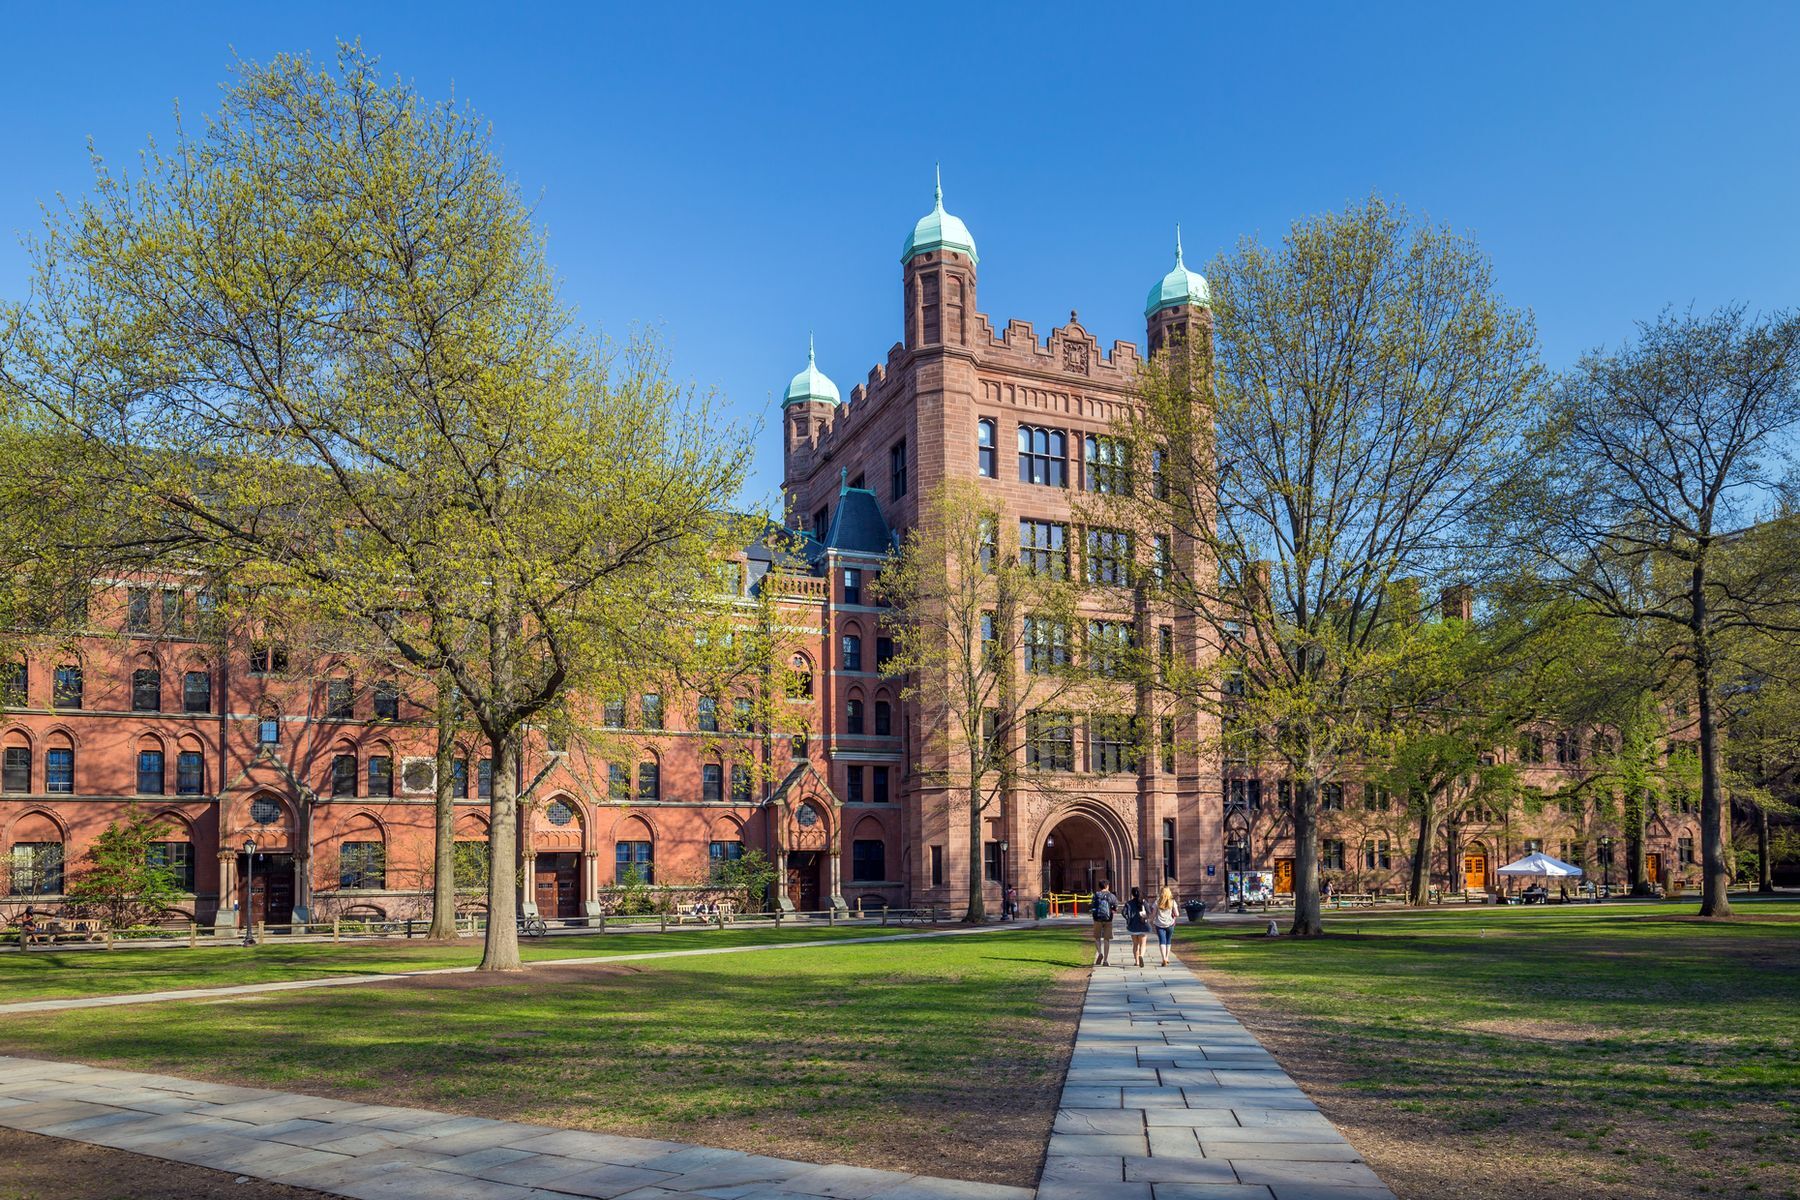 <p>DeSantis attended Yale University (pictured), where he earned a degree in history in 2001. He also studied law at Harvard University and graduated in 2005. In his 2023 memoir <em>The Courage to Be Free</em>, DeSantis claims that his Ivy League degrees were actually “<a href="https://www.nhregister.com/news/article/ron-desantis-book-yale-courage-to-be-free-florida-17816058.php">political scarlet letters as far as a GOP primary went</a>” because many Republican voters felt that these schools were for the elite and associated them with the political left.</p>